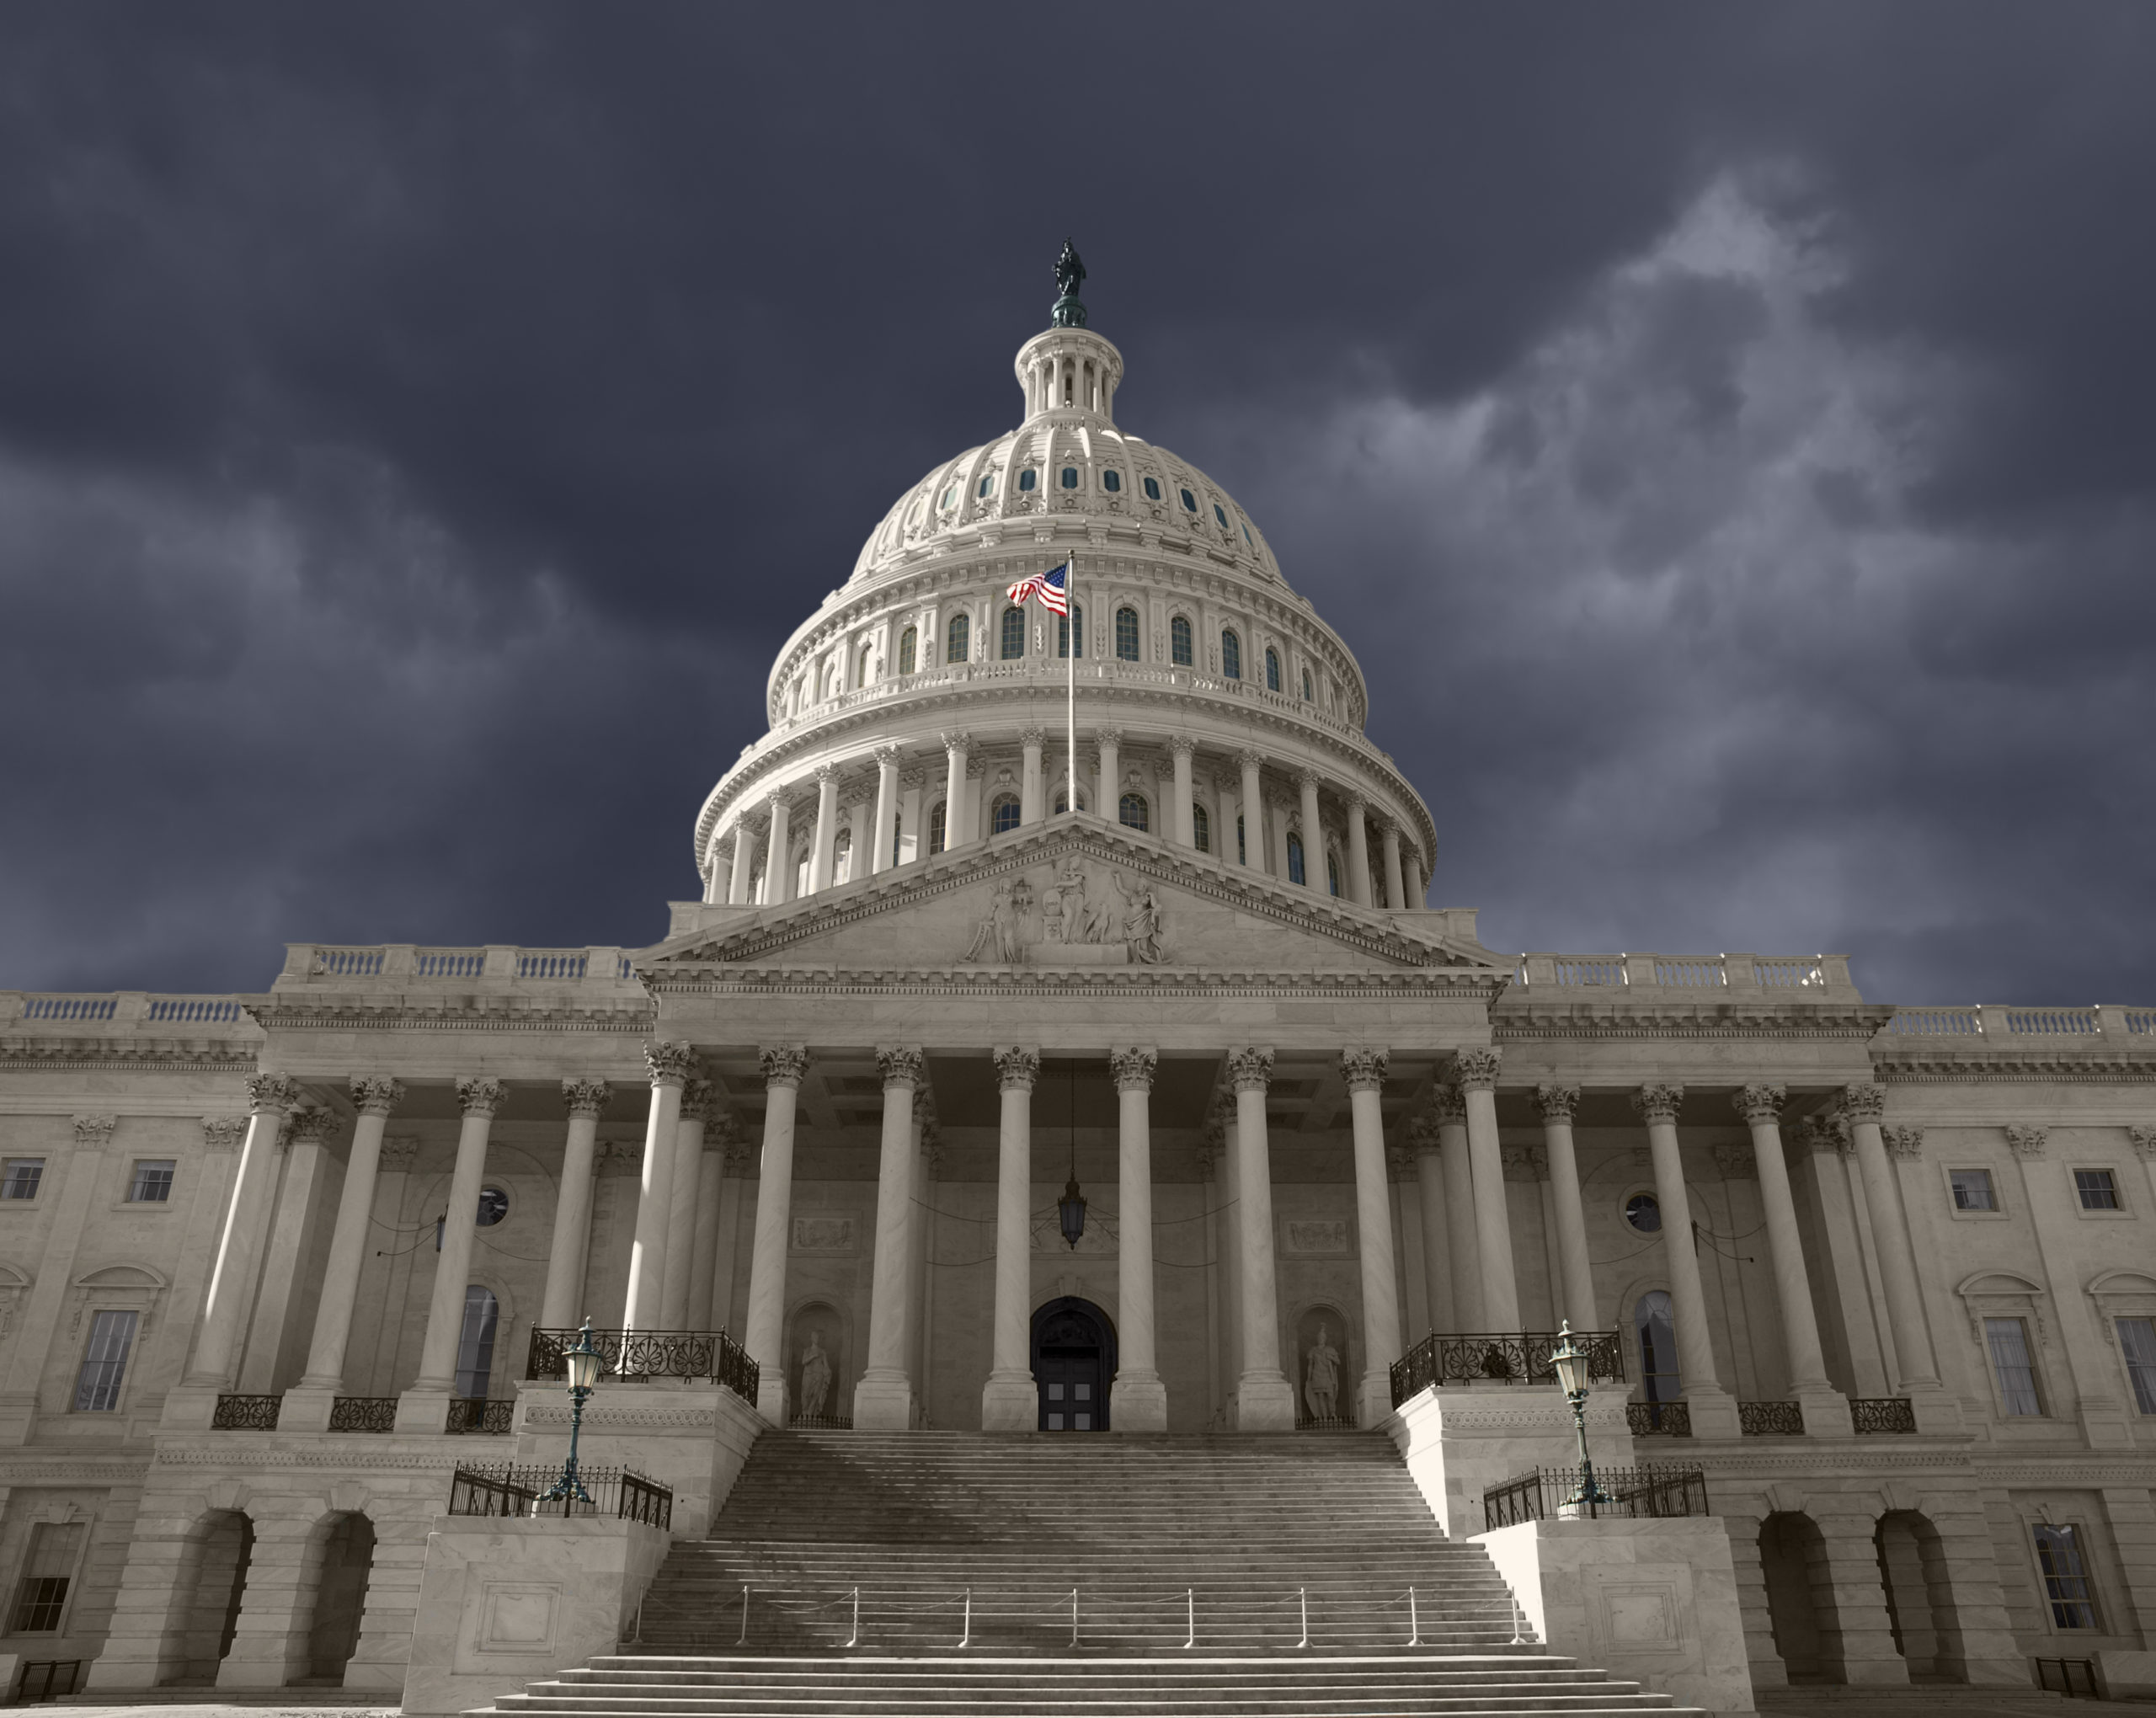 Dark Sky over the United States Capitol